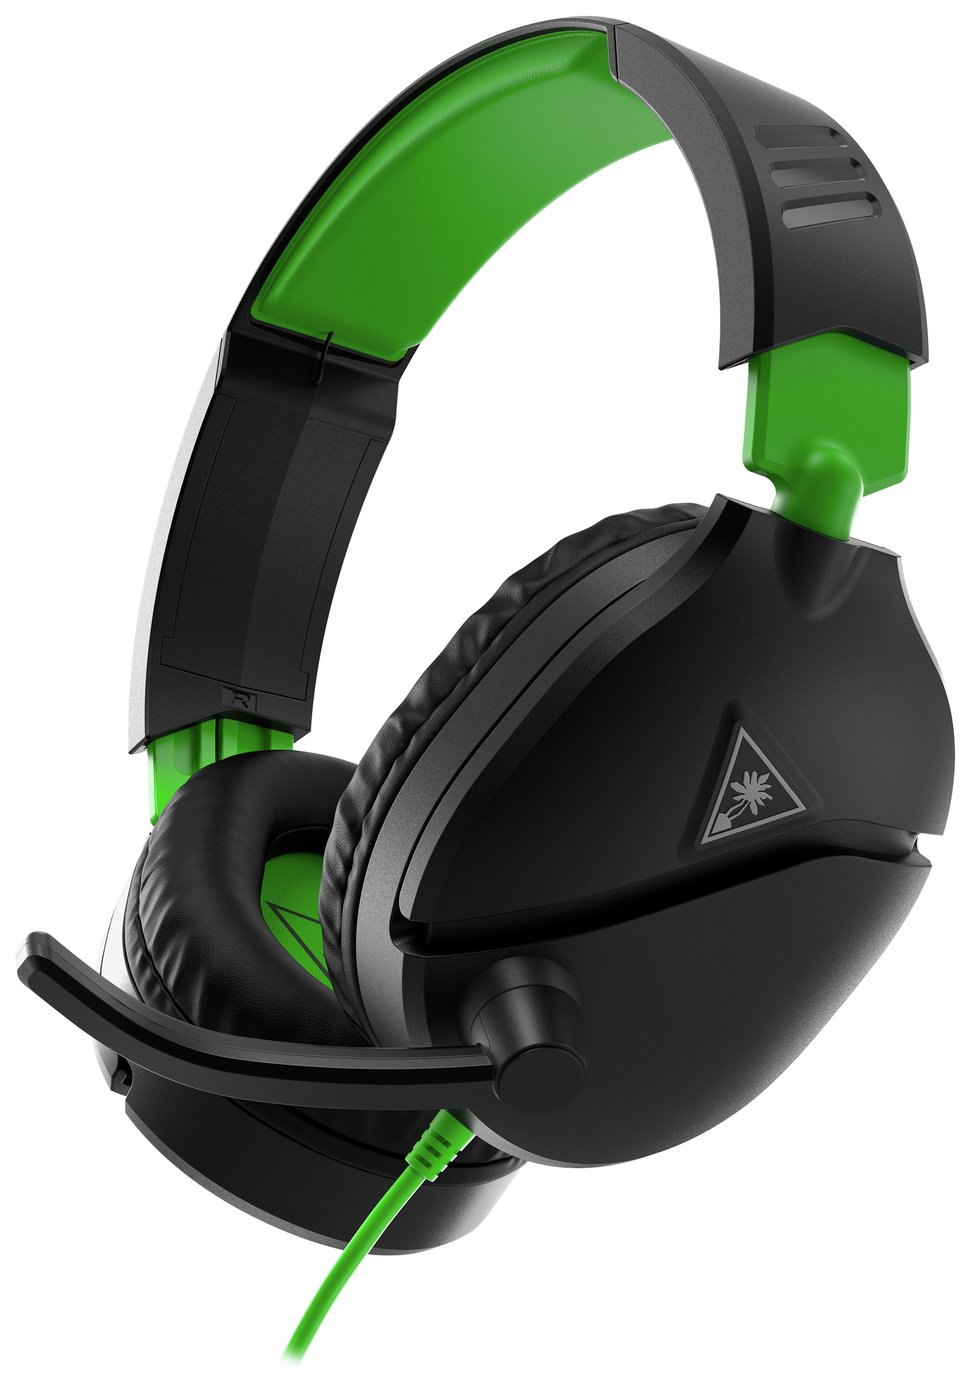 does ps4 turtle beach work on xbox